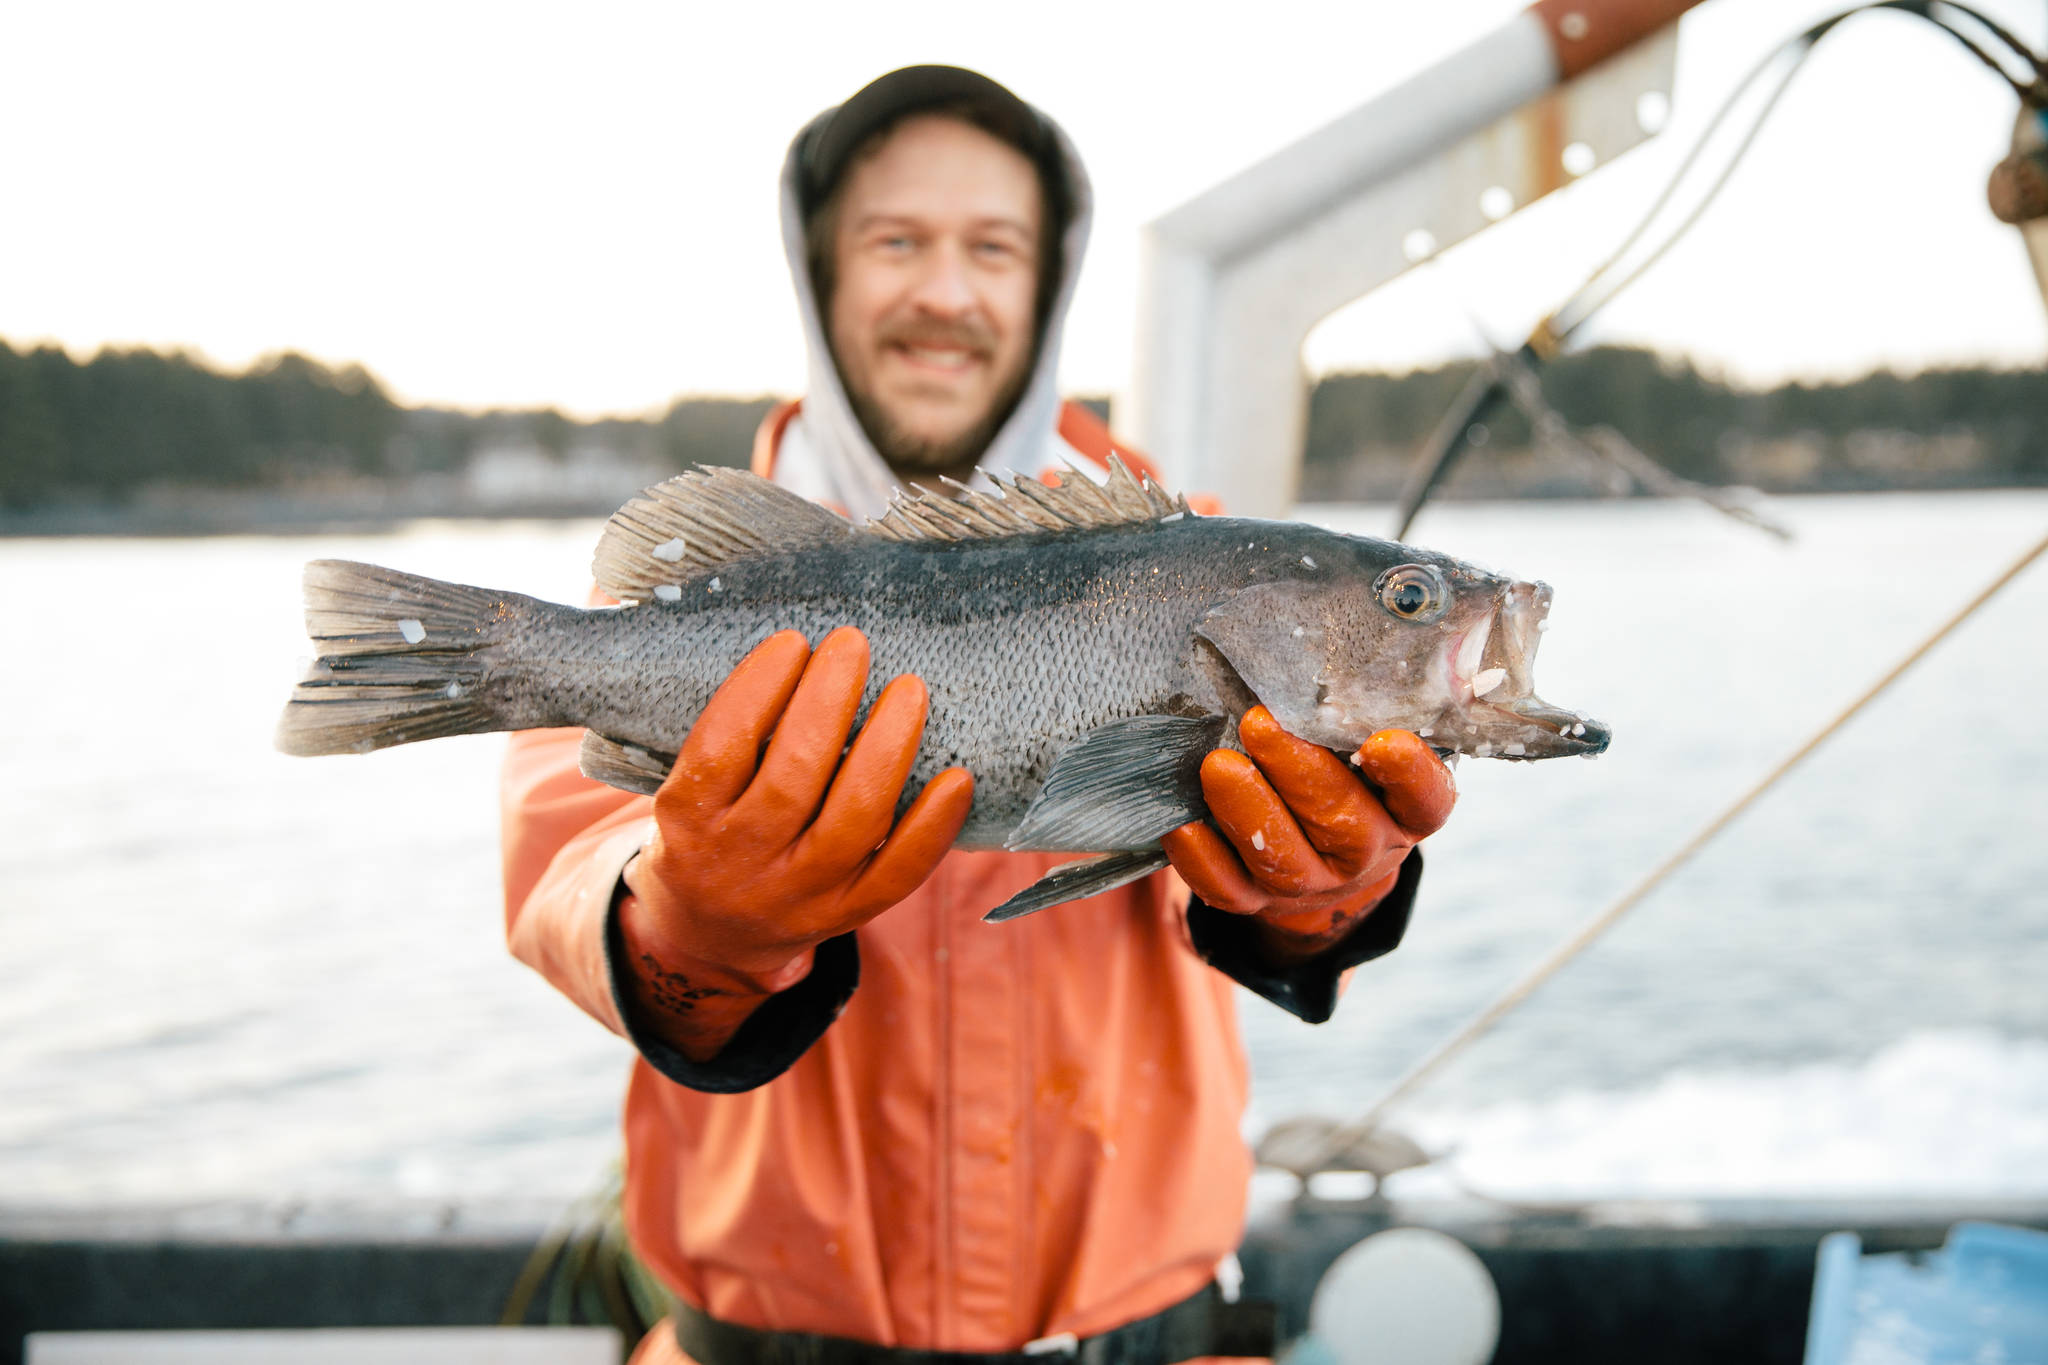 Connecting people to salmon in Alaska, the East Coast and the Midwest during COVID-19